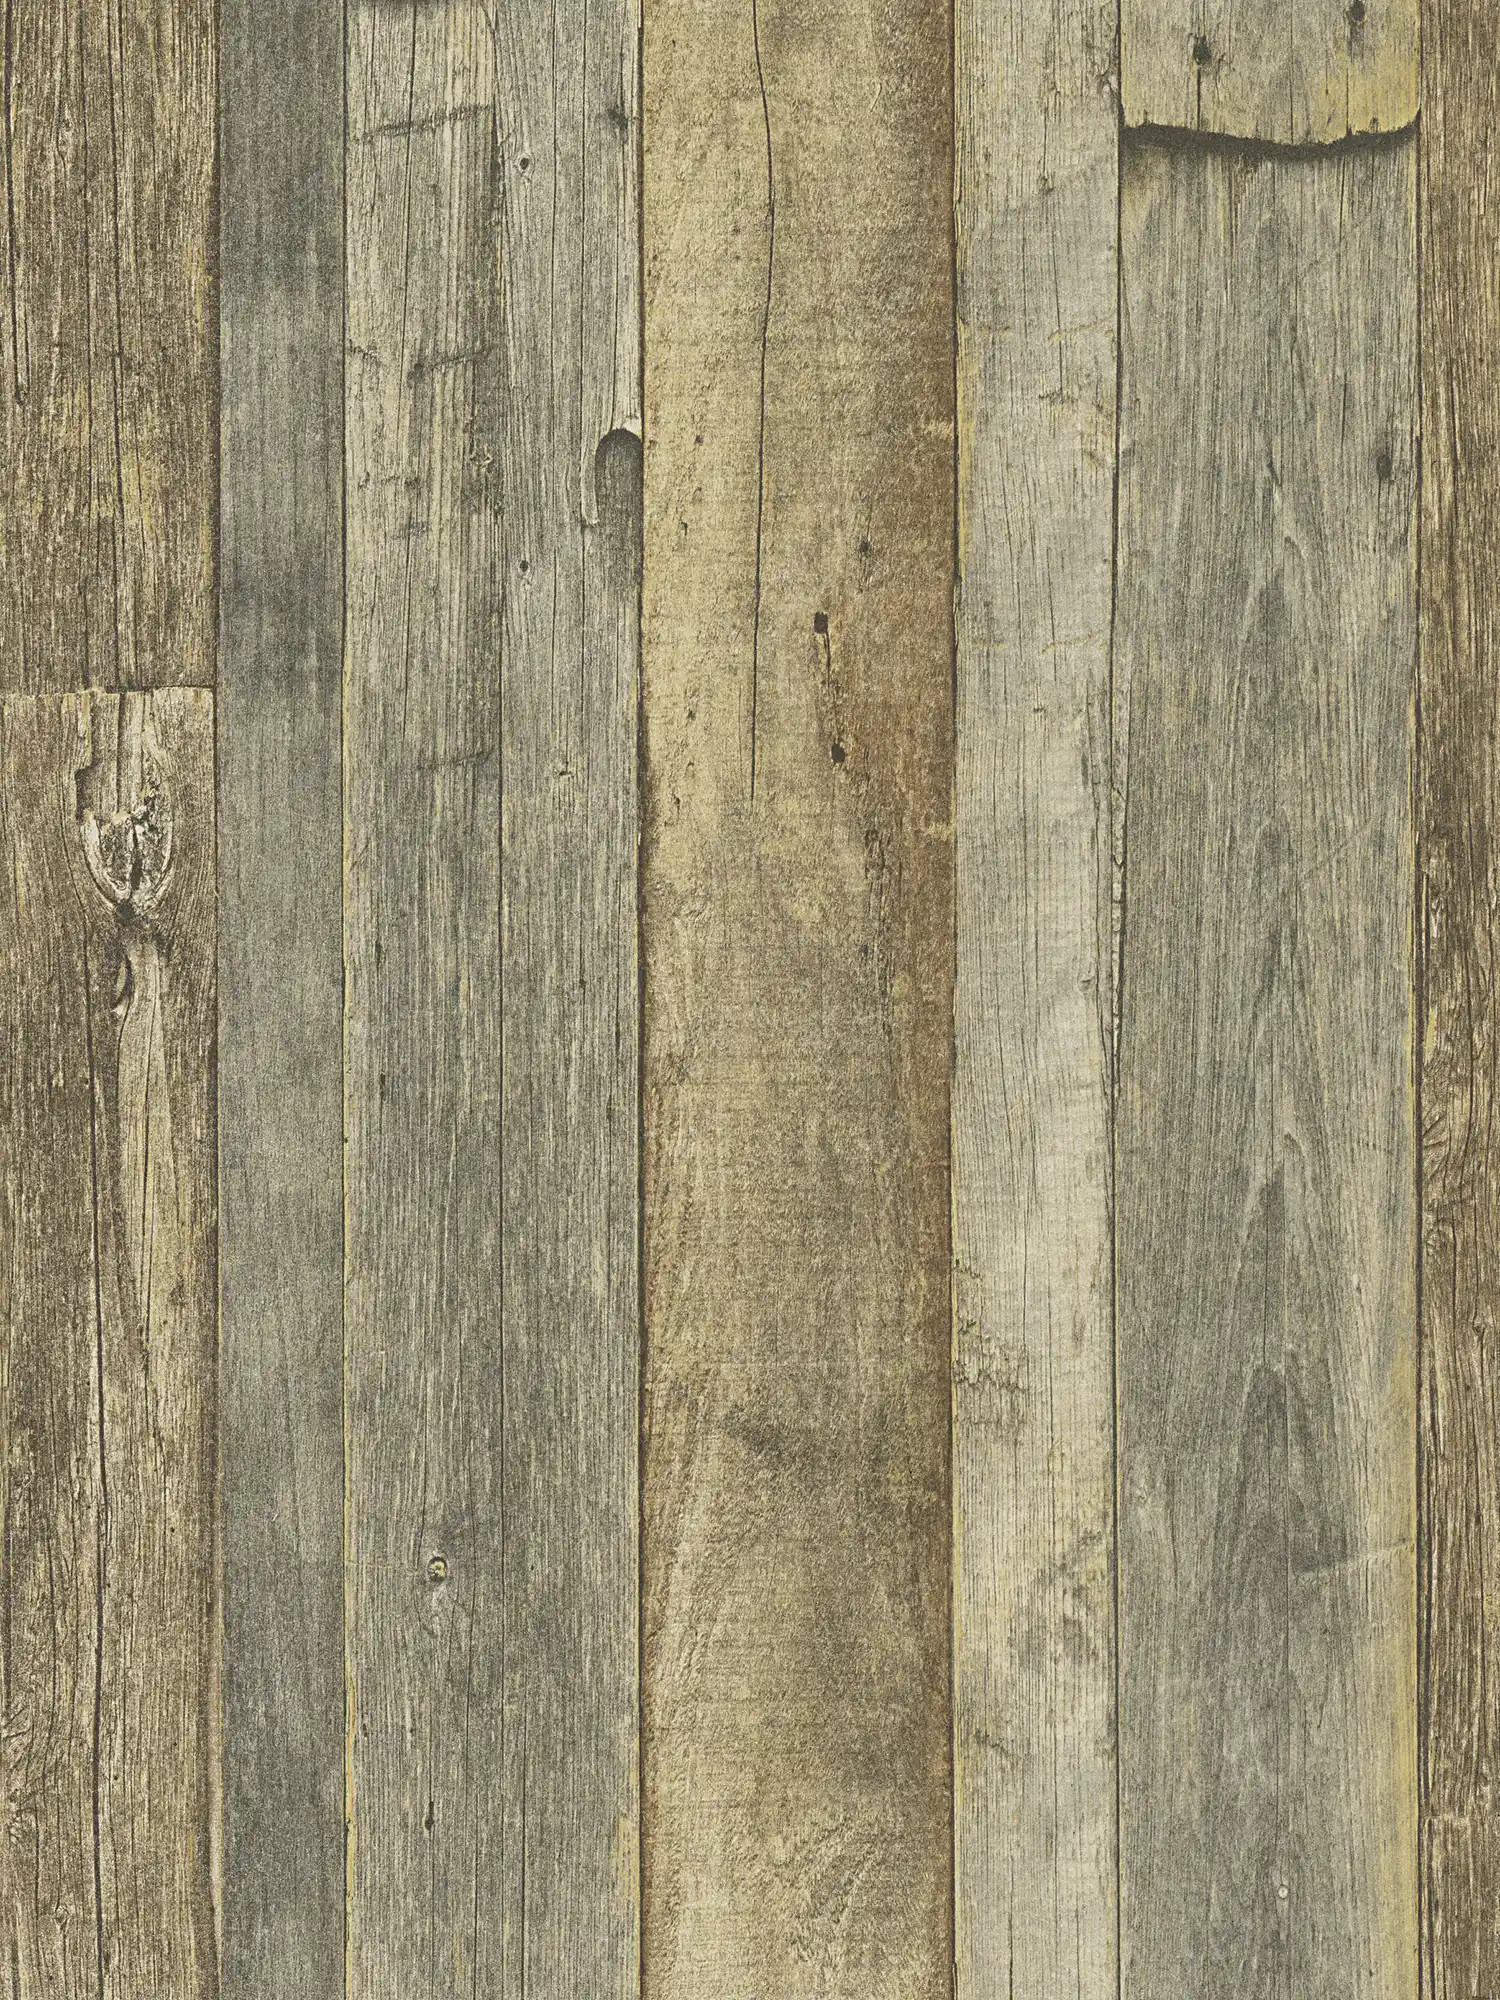         Wallpaper with wood look in rustic country style - brown, yellow, cream
    